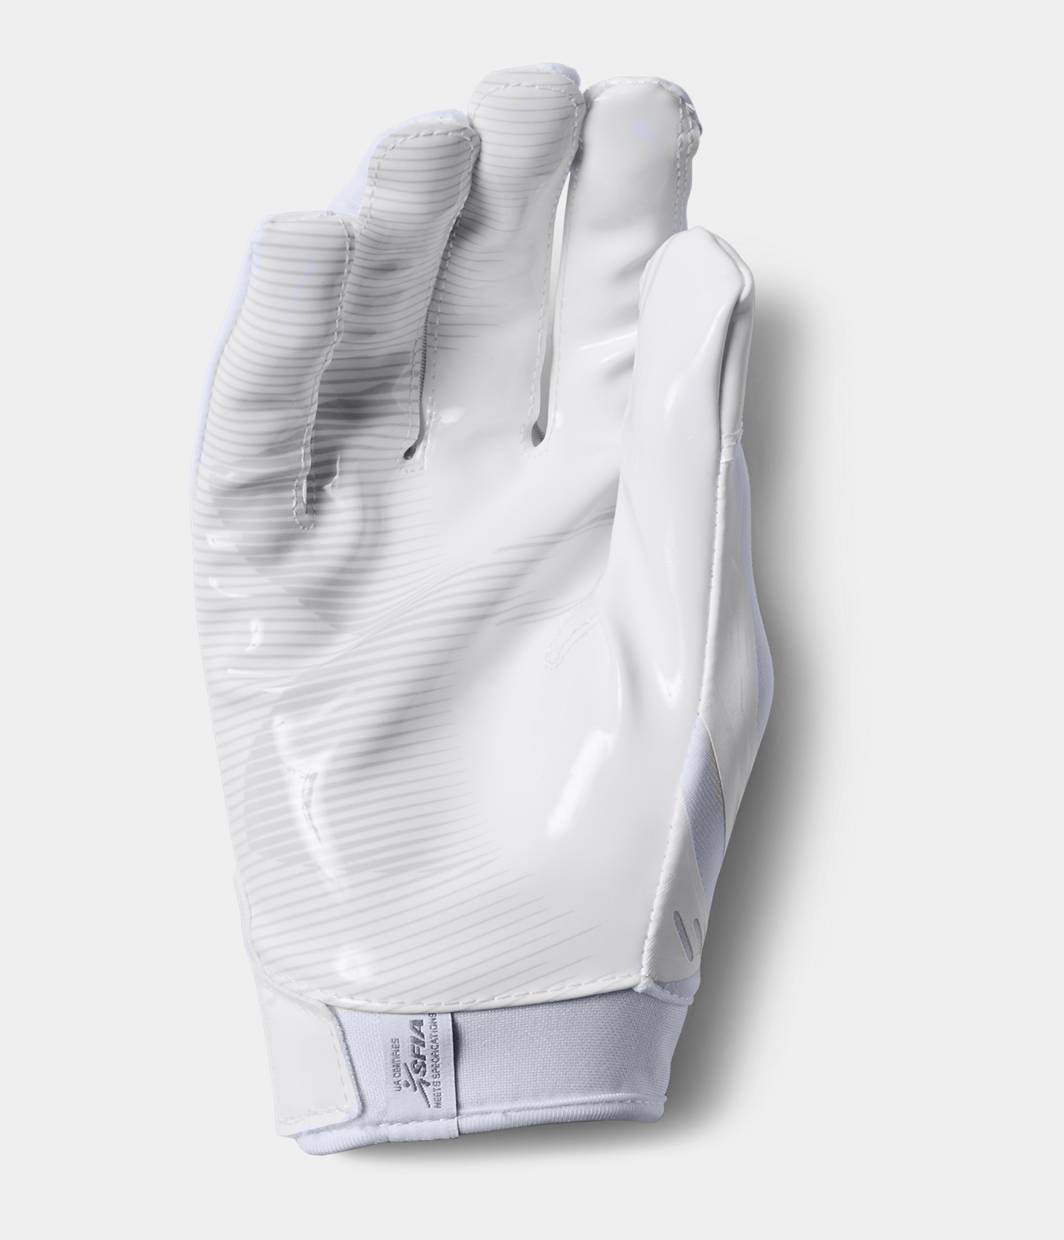 Under Armour UA F6 ADULT Men's Football Gloves with Grabtack 1304694 Sale $19.95